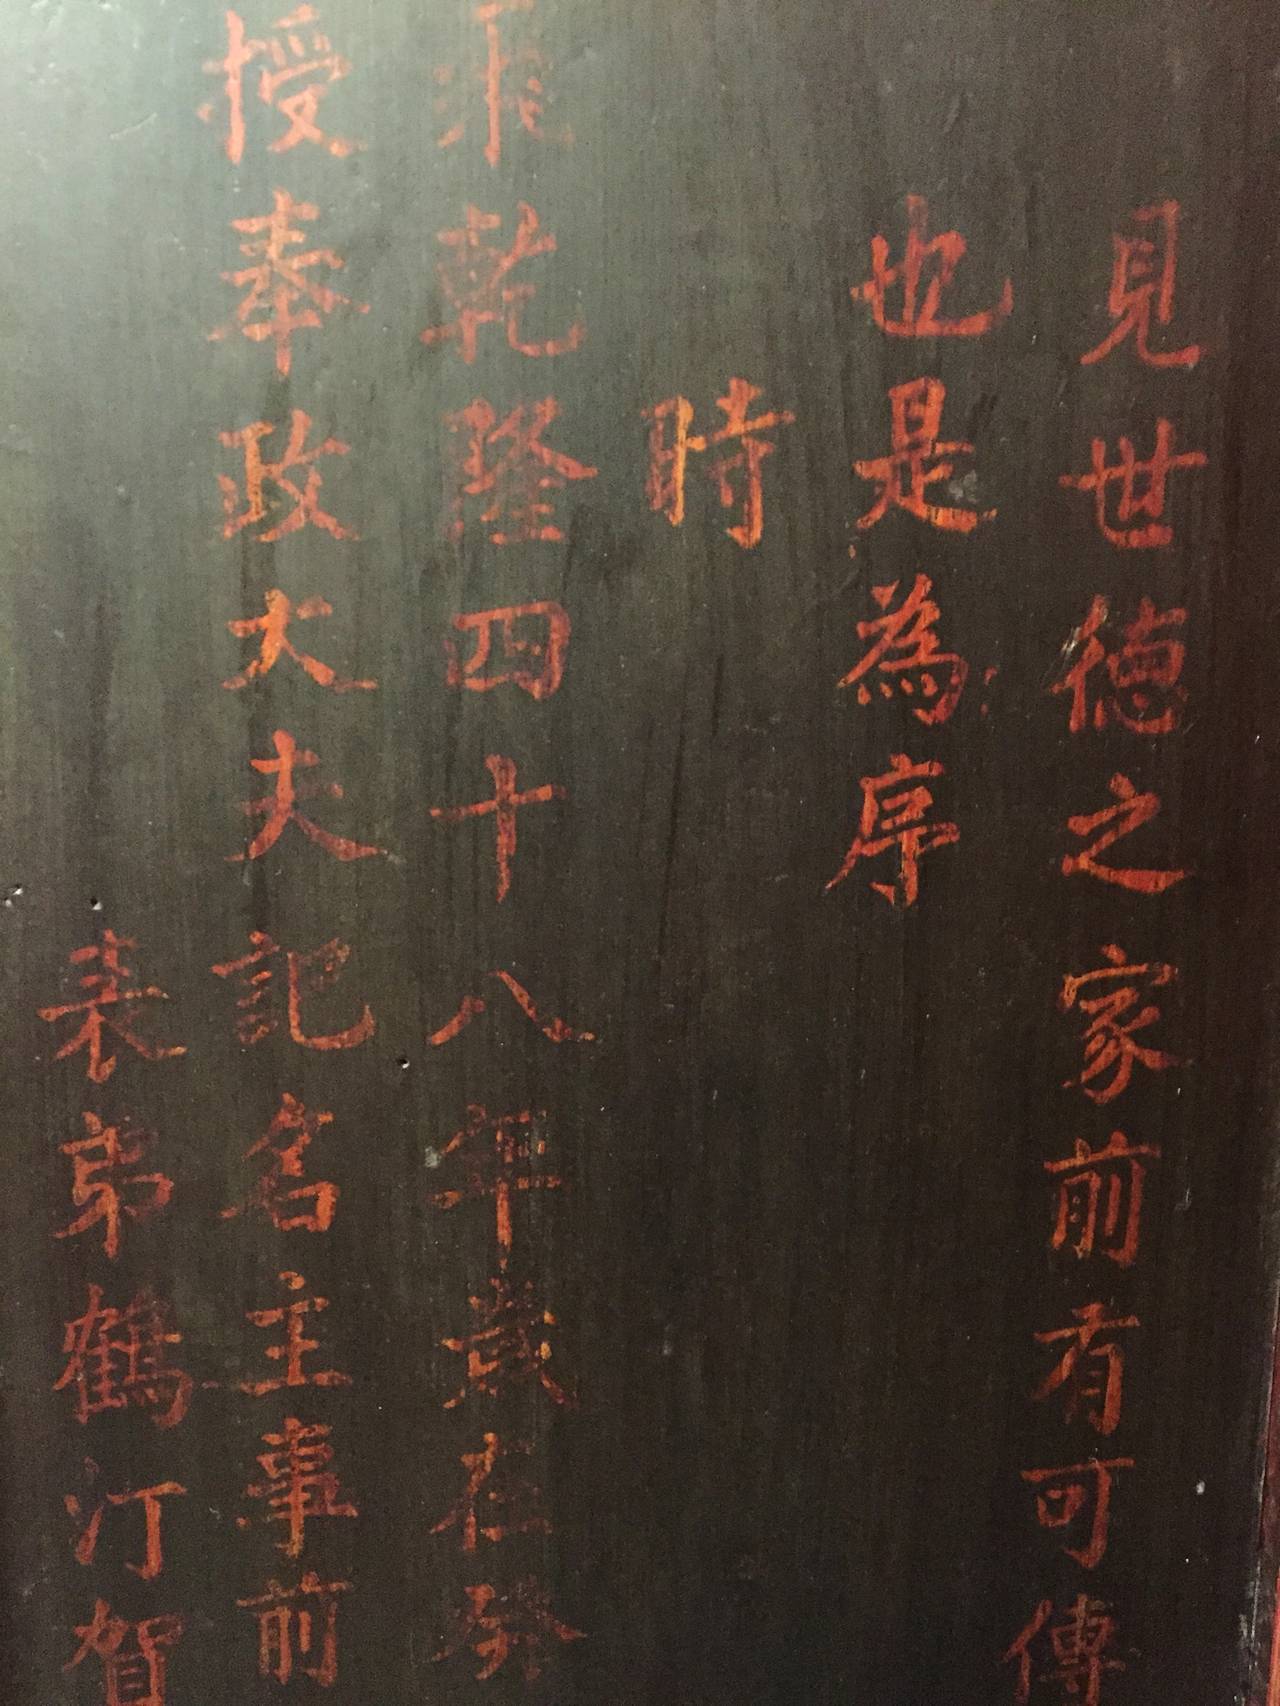 This is very rare, unusual screen from China An Hui Province. The eight-panel screen depicts a long article written by an imperial official for his cousin honoring his various virtues as a scholar. It was presented as a birthday present. The article